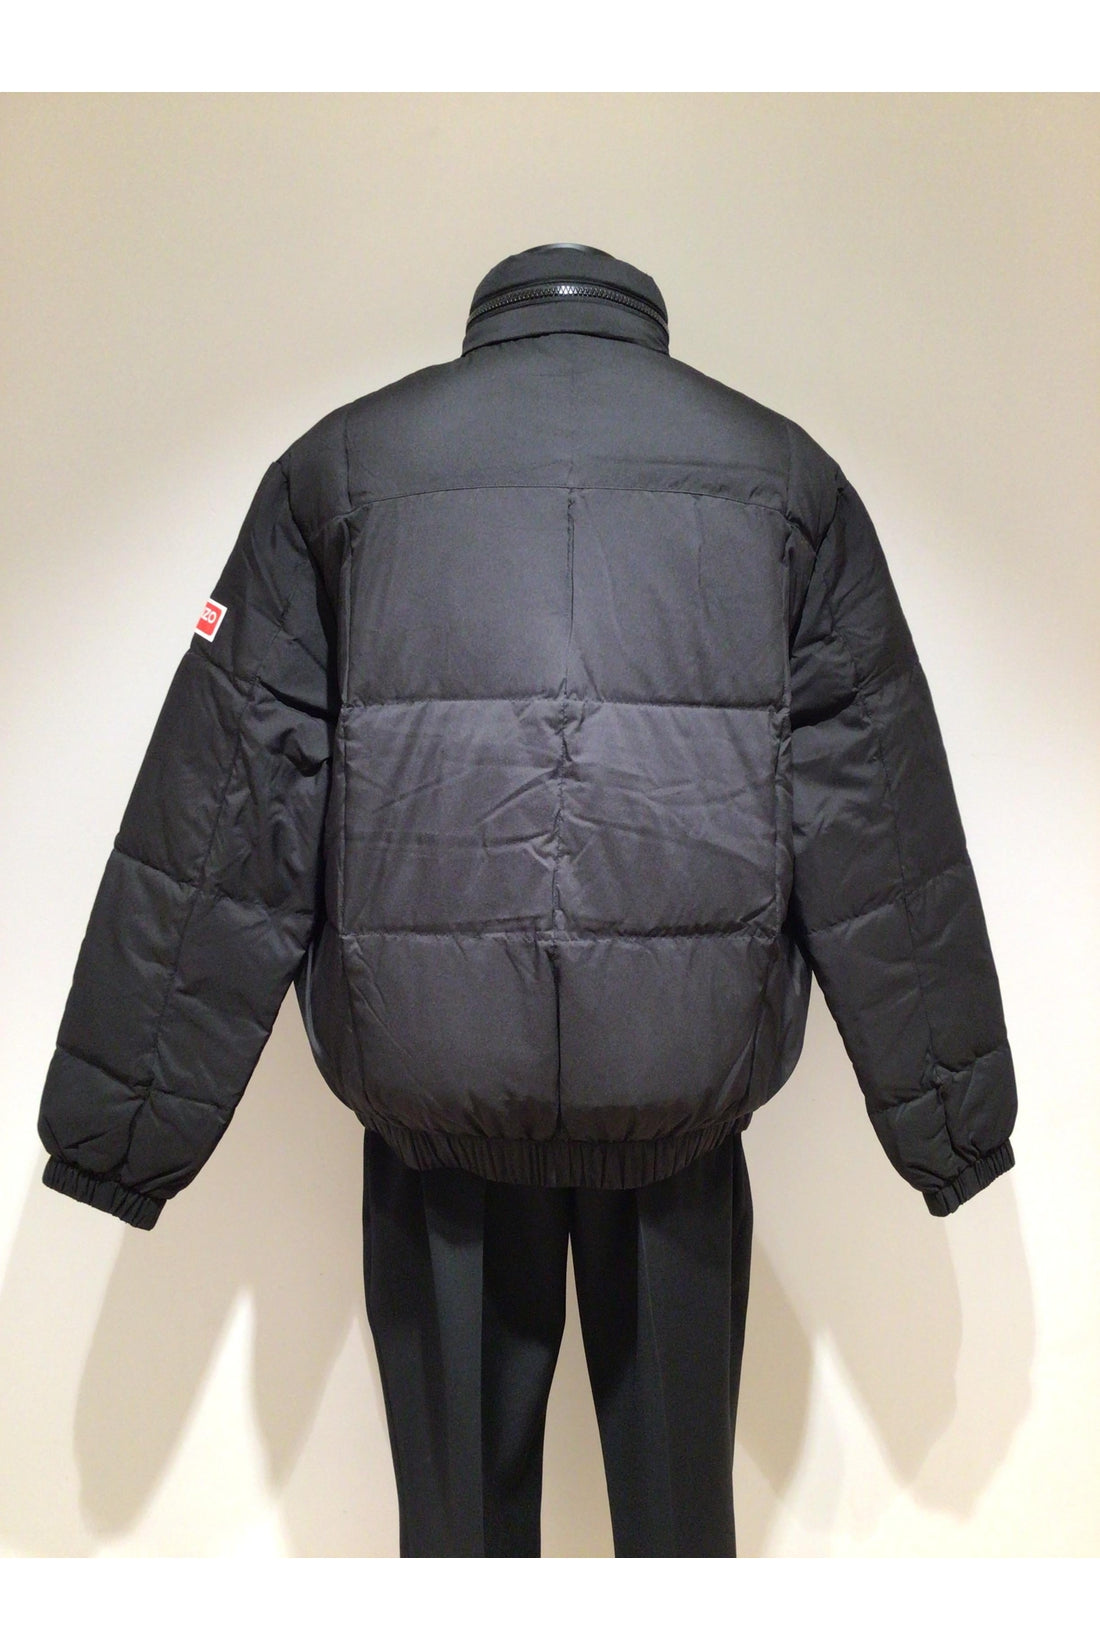 Kenzo-OUTLET-SALE-Boxy full zip down jacket-ARCHIVIST